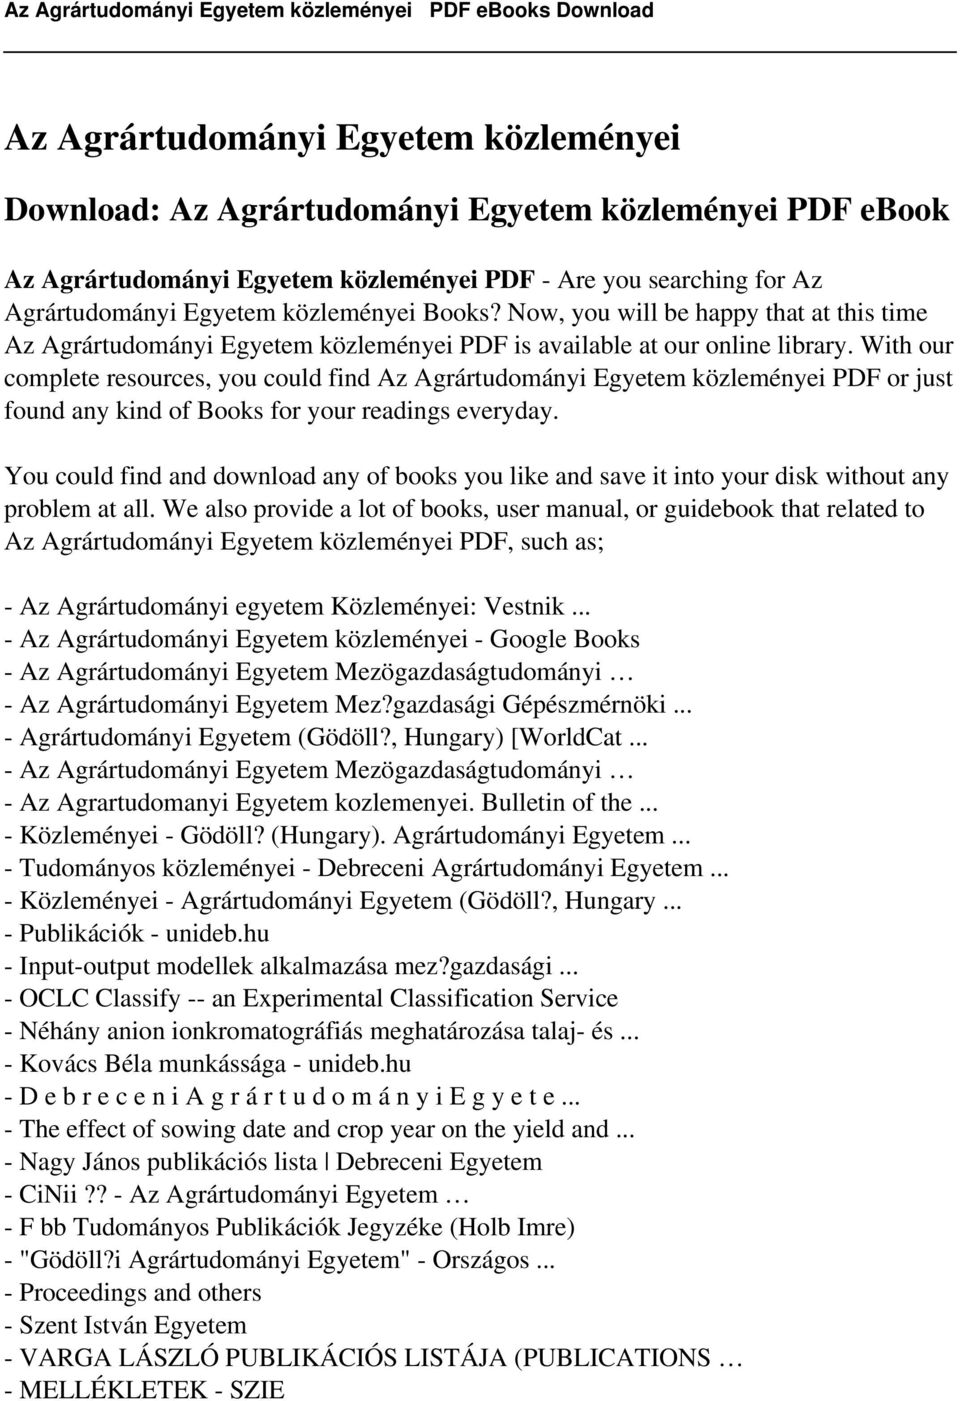 With our complete resources, you could find Az Agrártudományi Egyetem közleményei PDF or just found any kind of Books for your readings everyday.